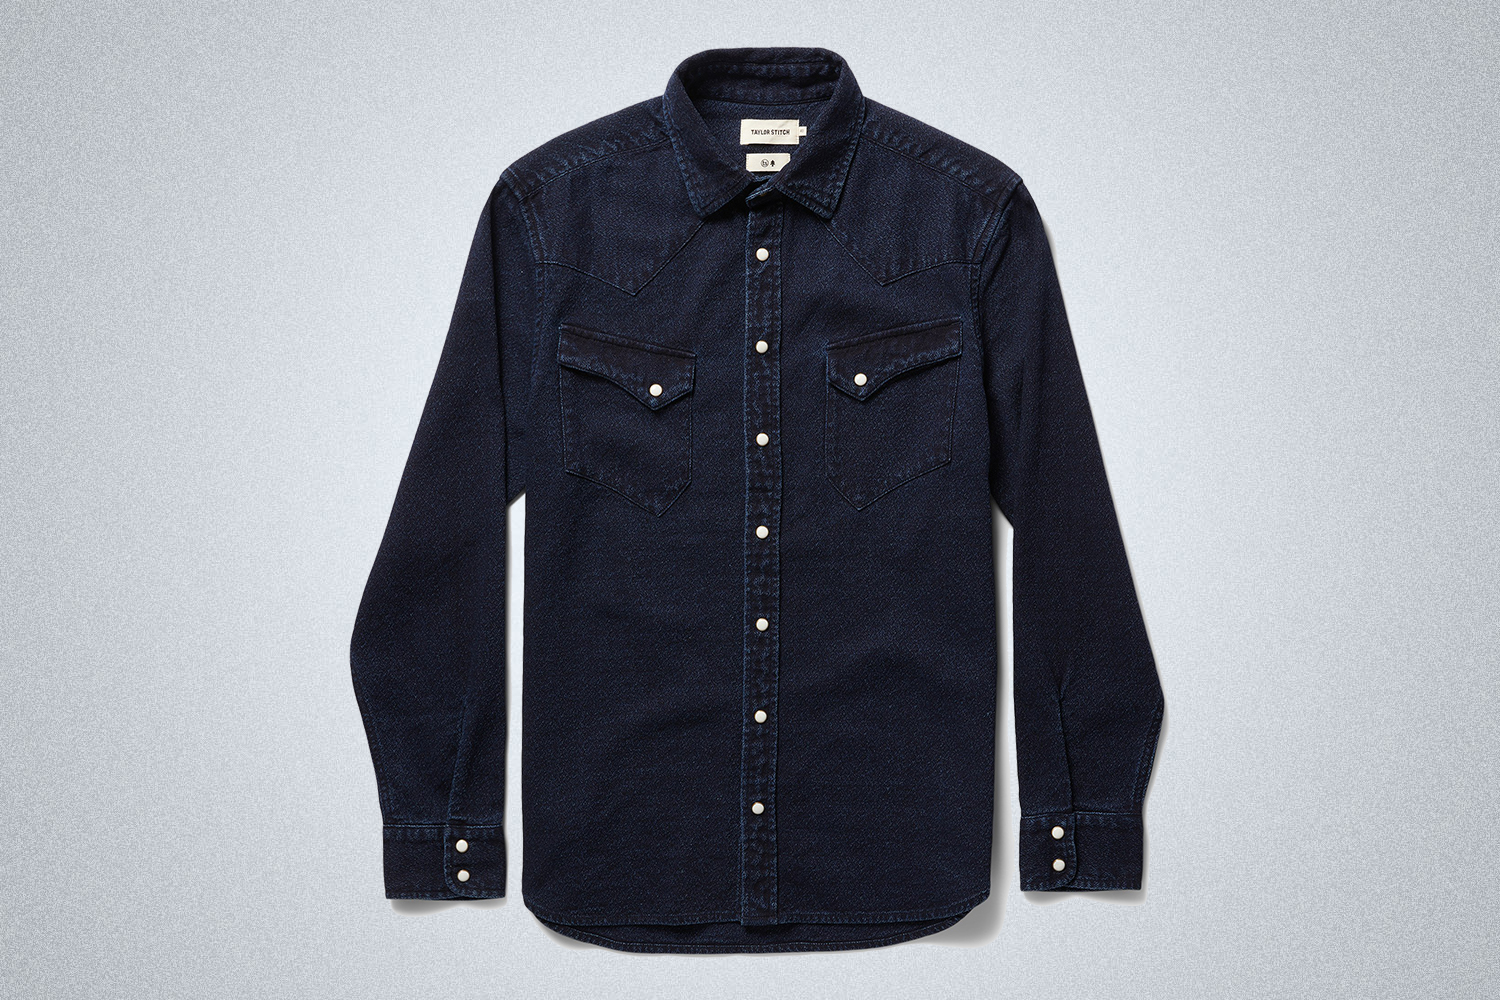 The men's Western Indigo Shirt from Huckberry and Taylor Stitch